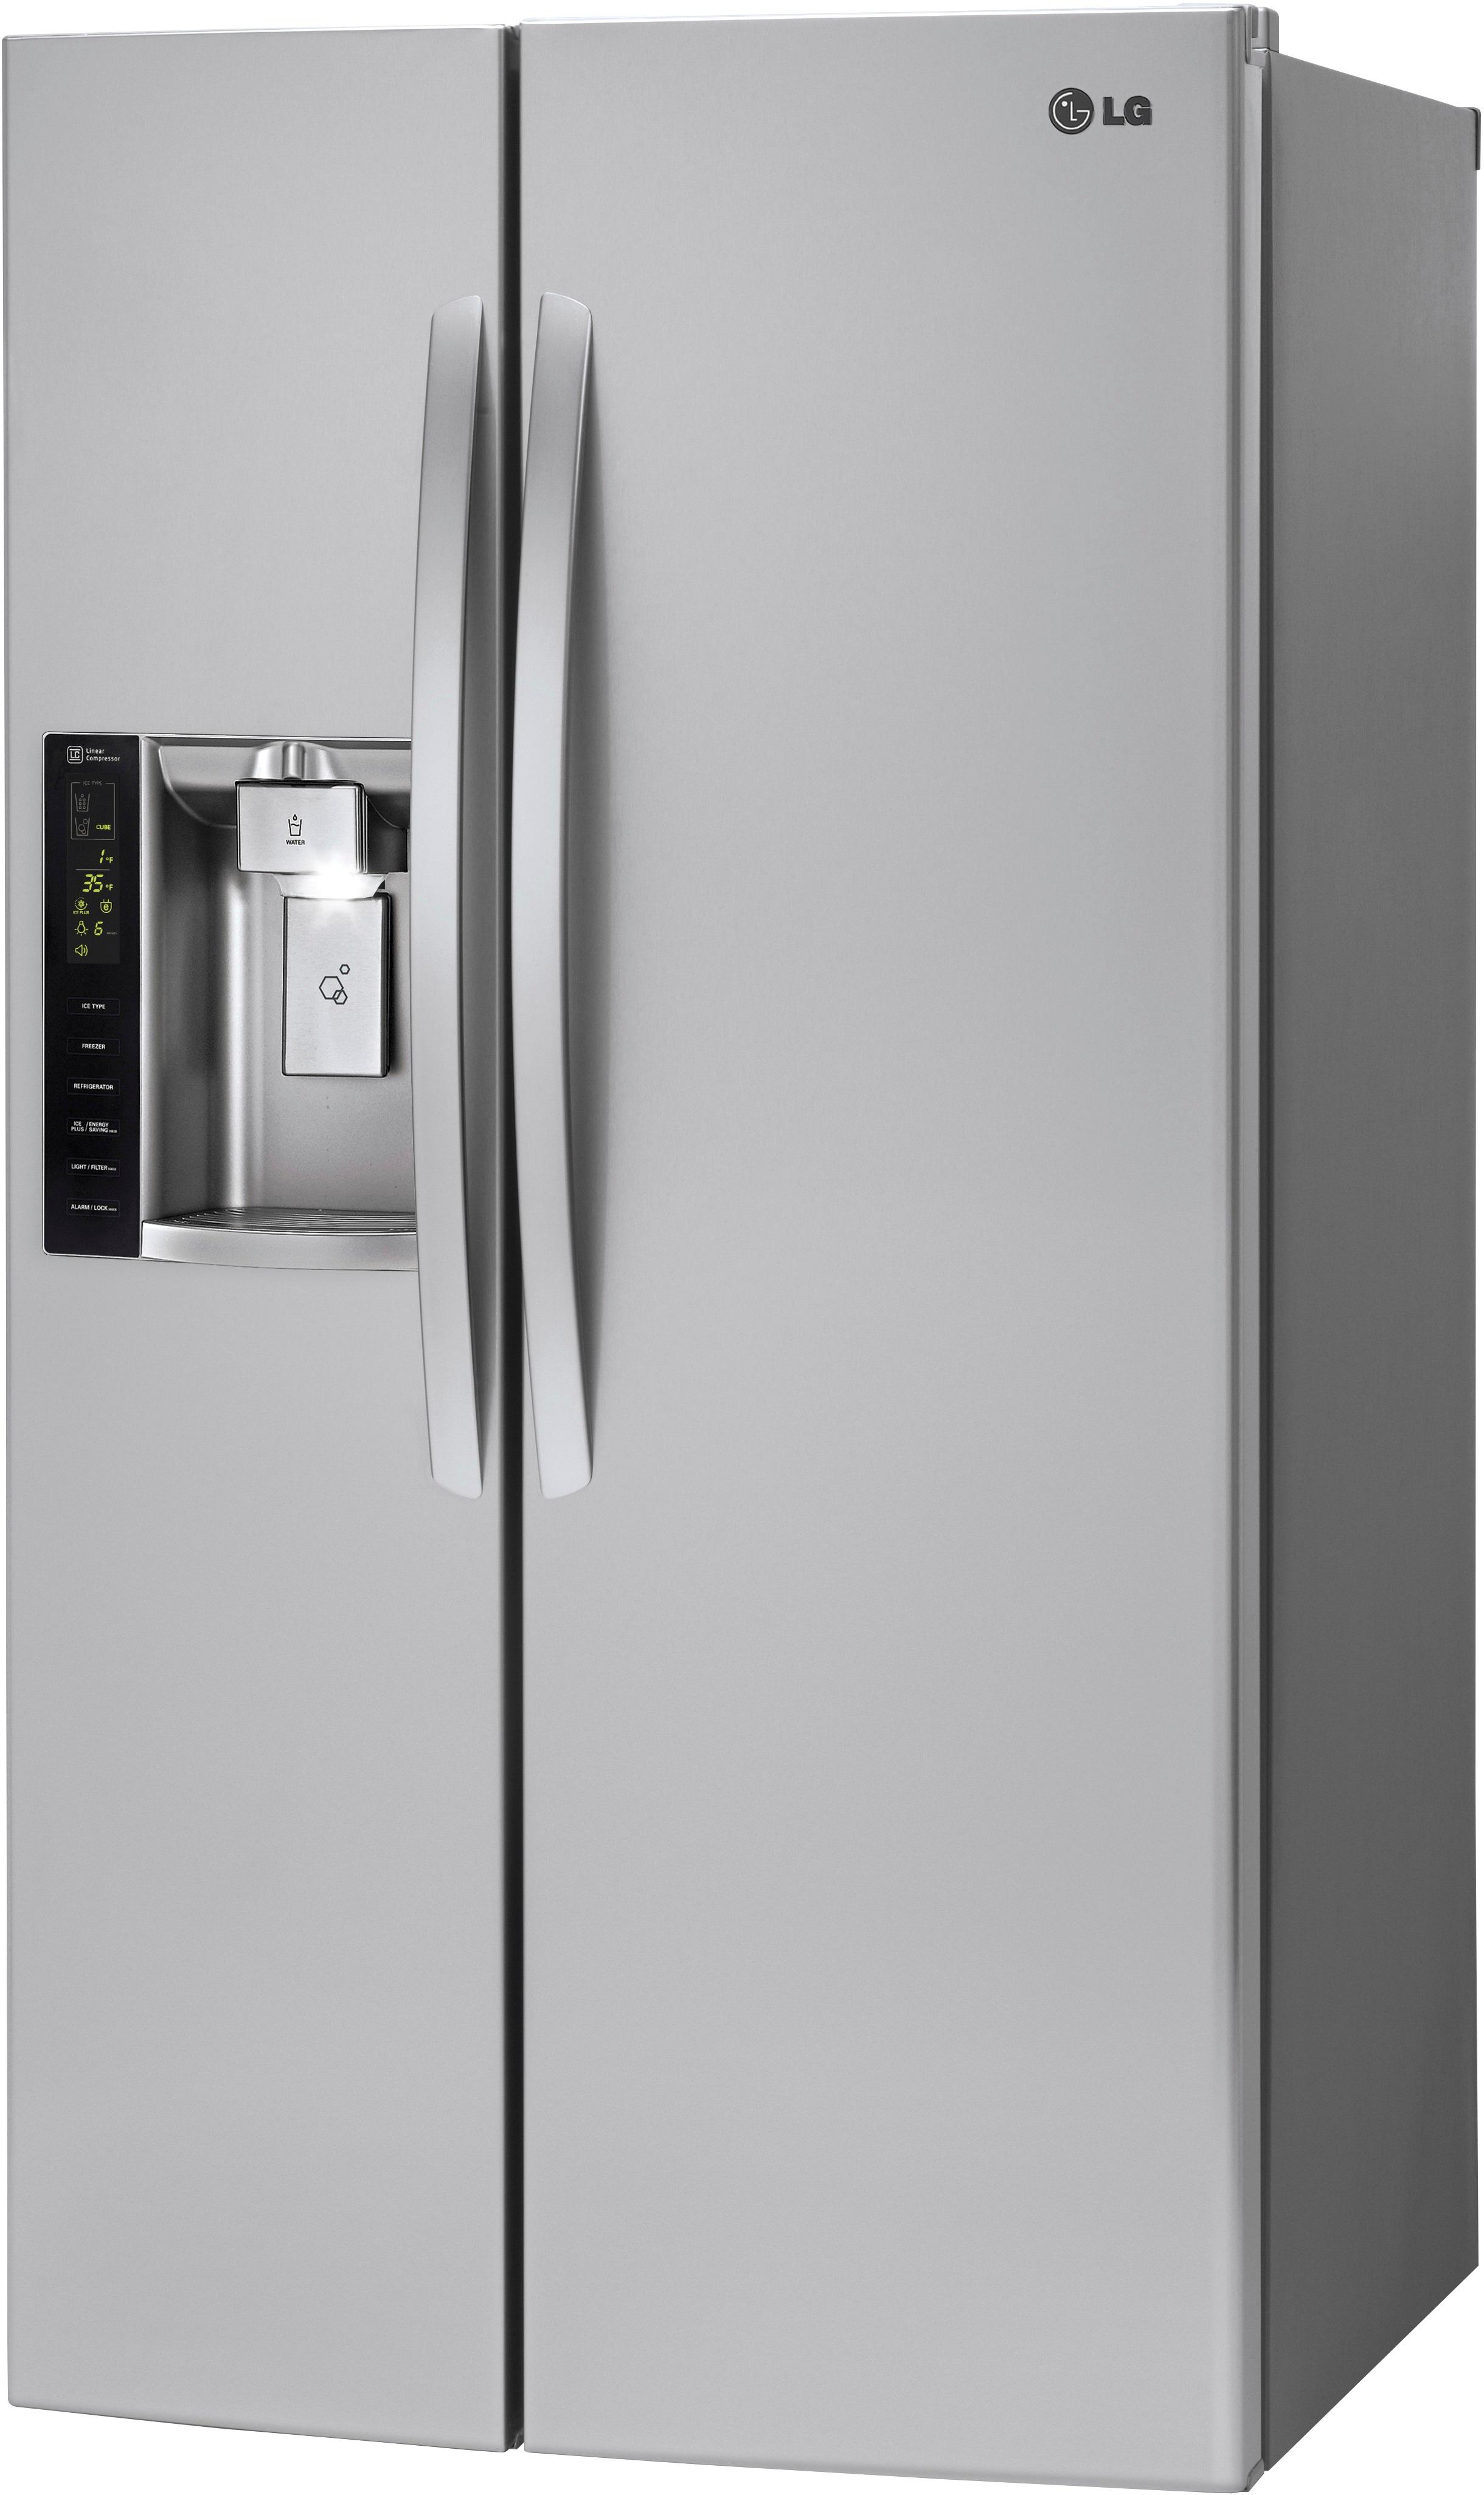 Lg 26 2 Cu Ft Side By Side Refrigerator With Thru The Door Ice And Water Stainless Steel Lsxs26326s Best Buy